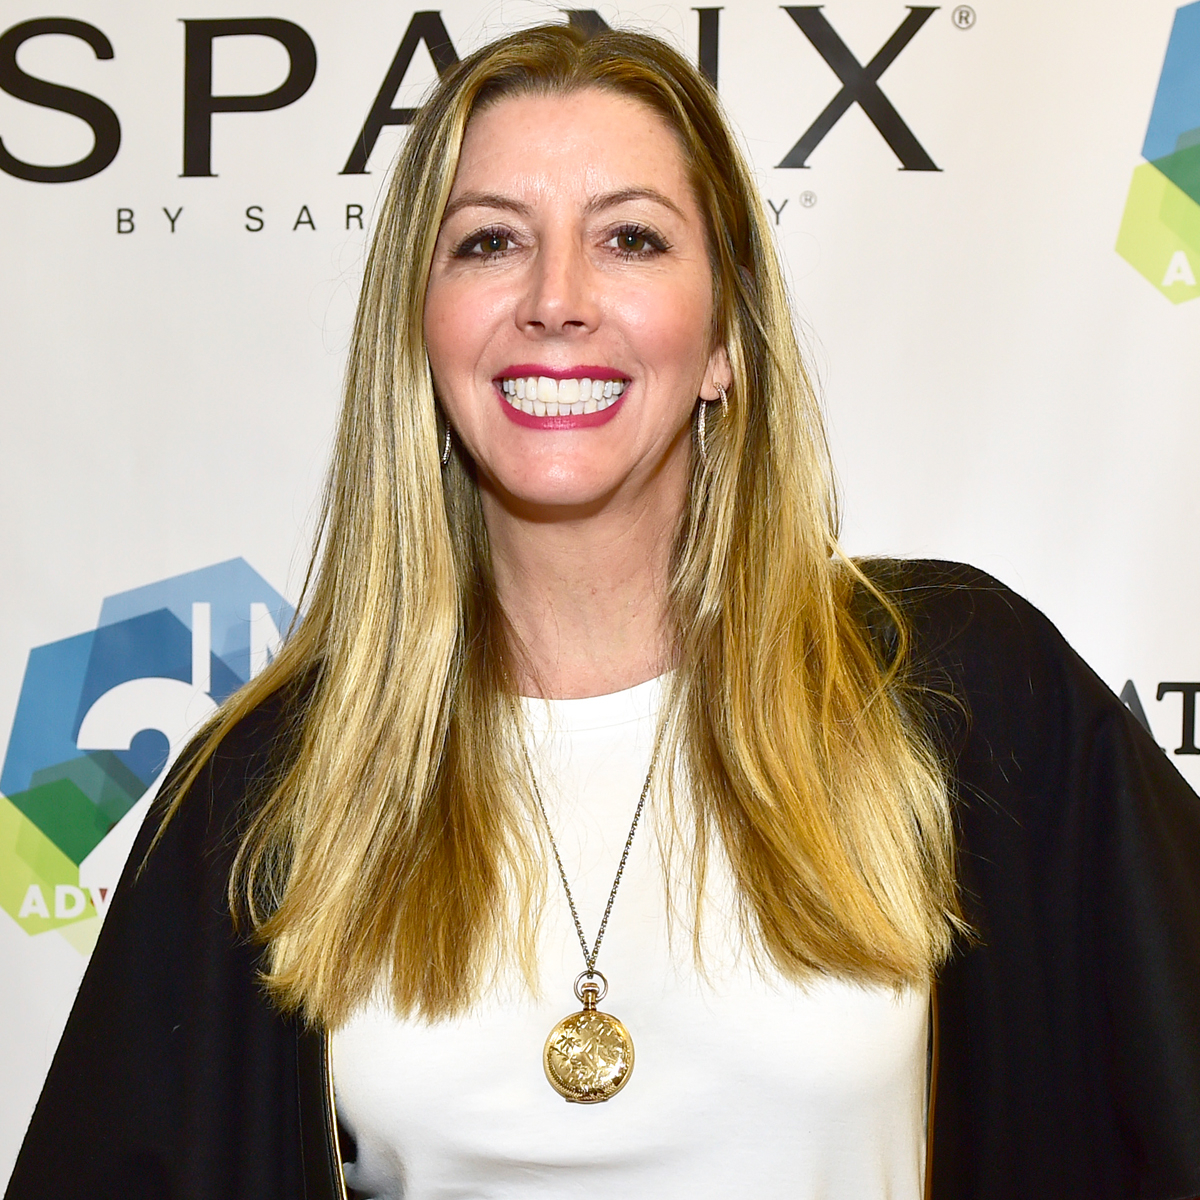 Sara Blakely Is A Billionaire (Again) After Selling A Majority Of Spanx To  Blackstone